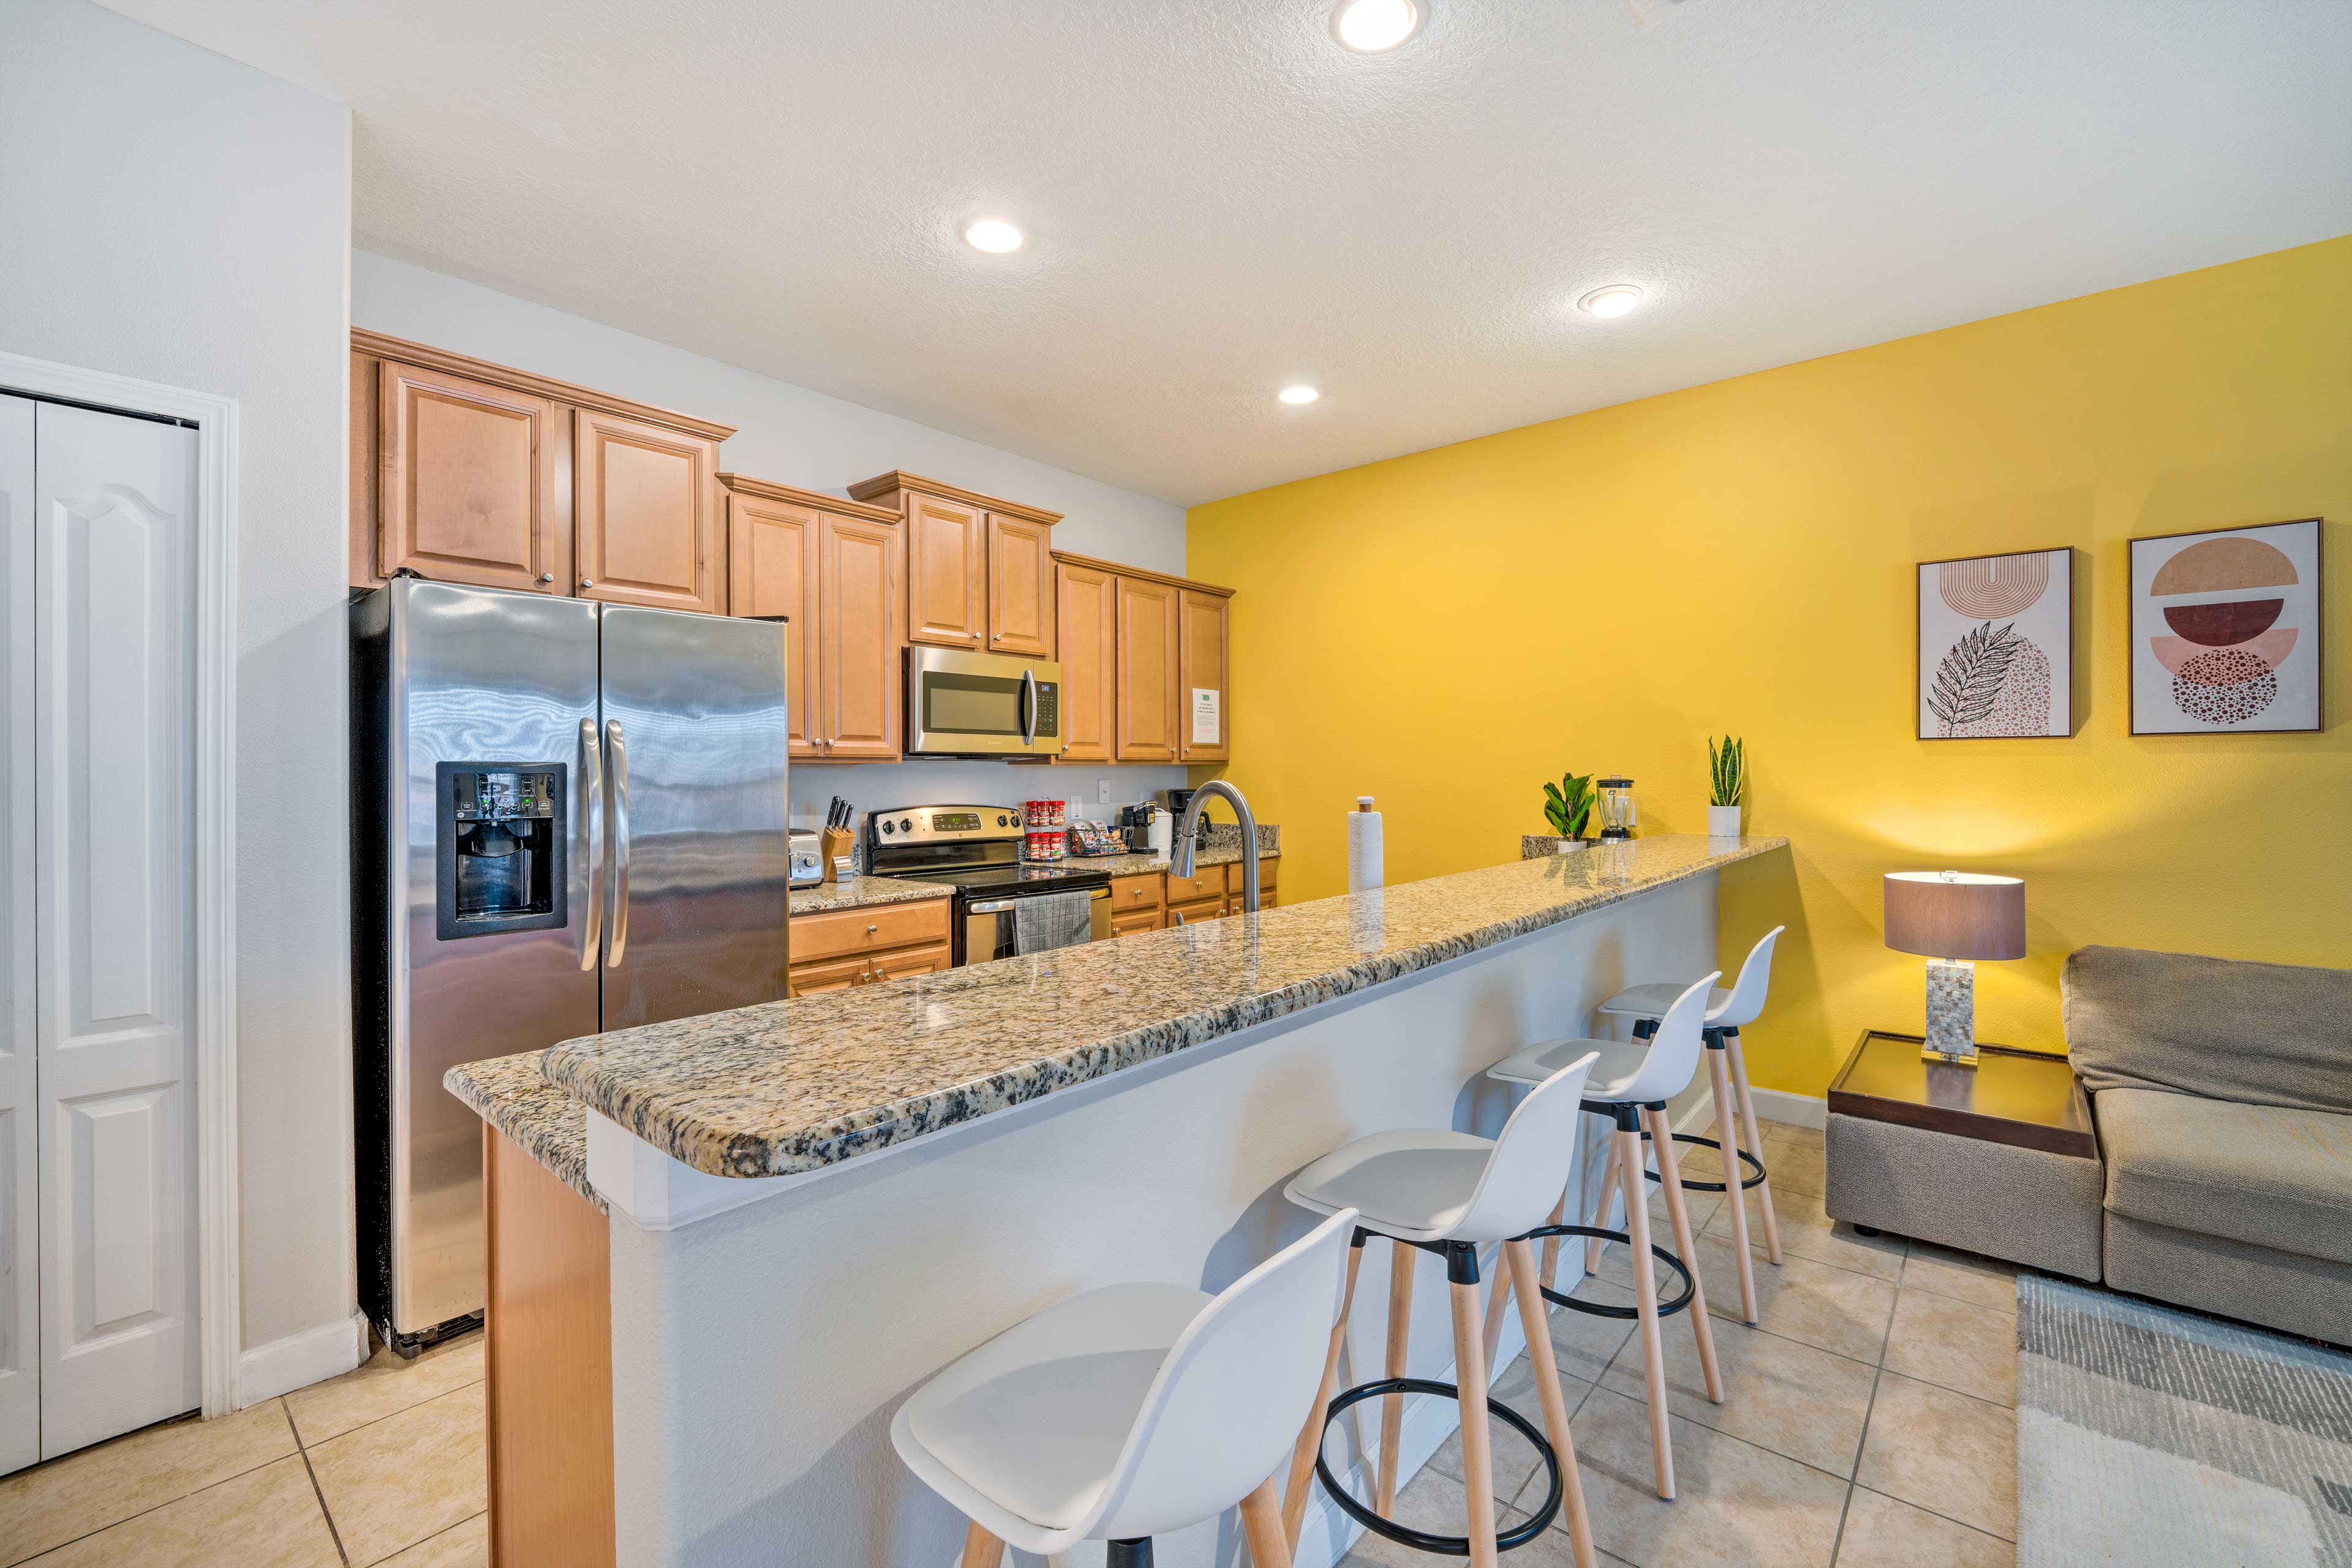 Kitchen | Coffee Maker | Toaster | Complimentary Snacks | Spices | Dishwasher